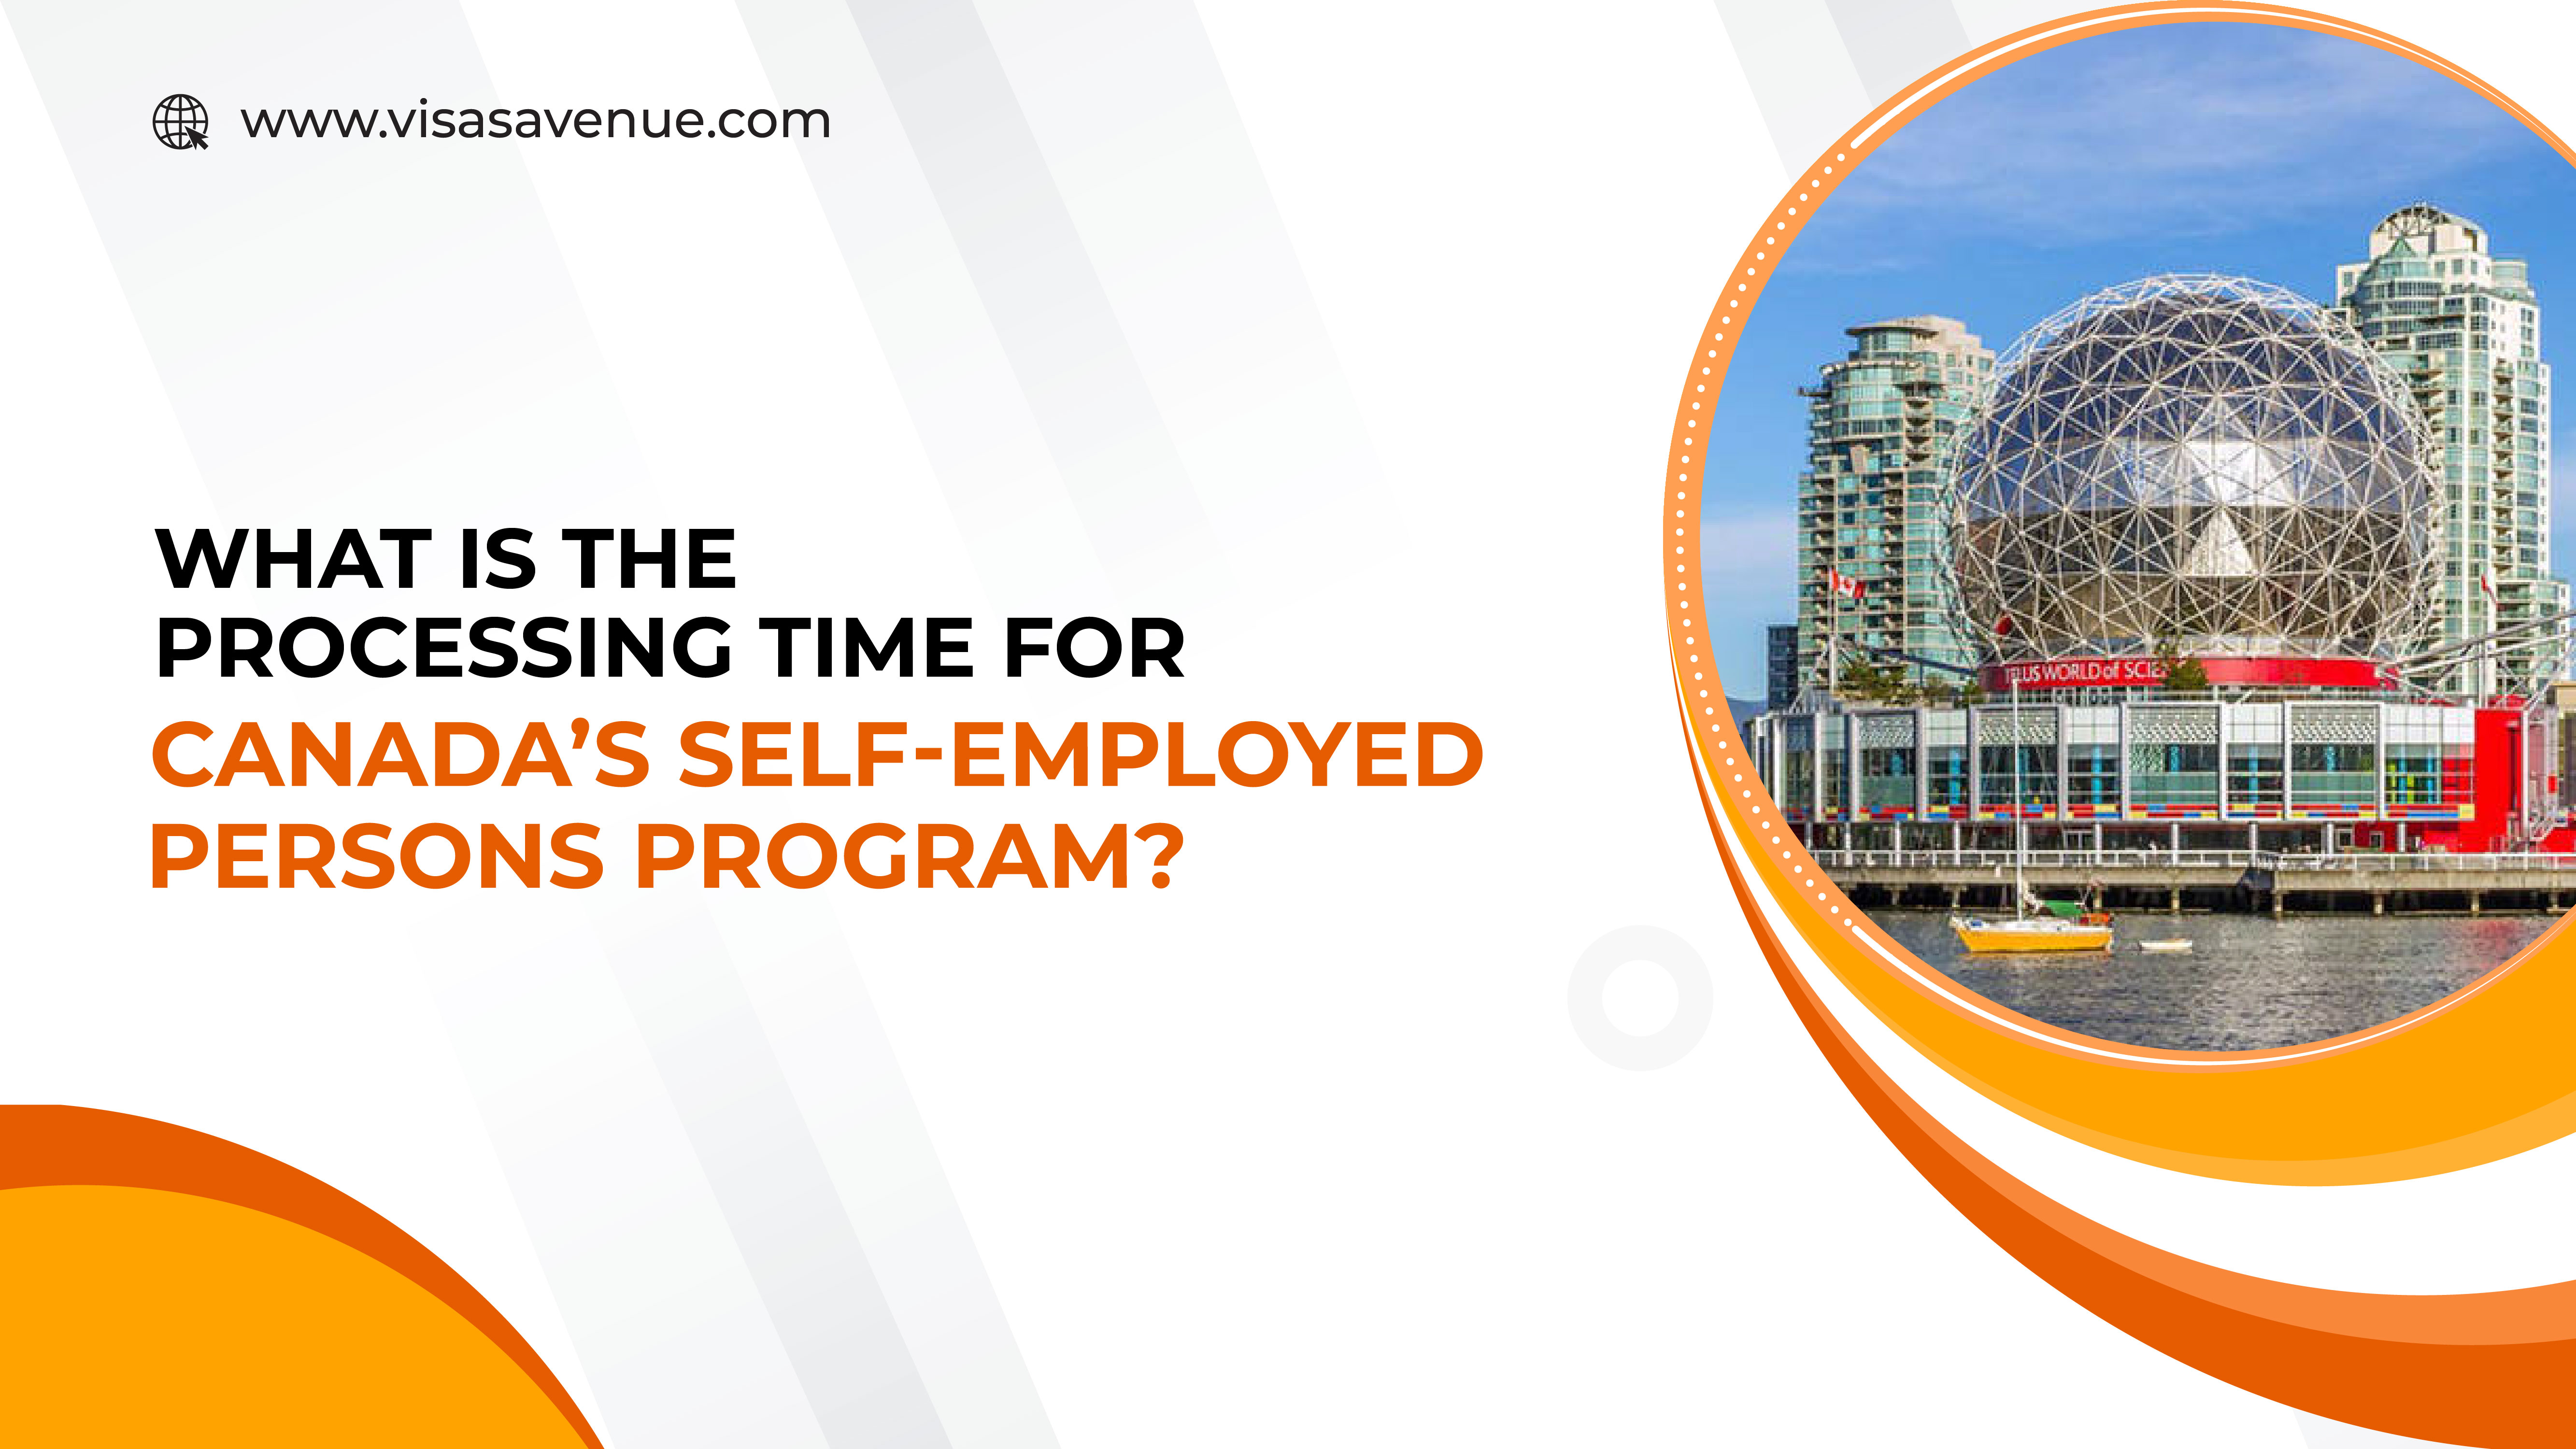 What is the Processing Time for Canadas Self-Employed Persons Program?